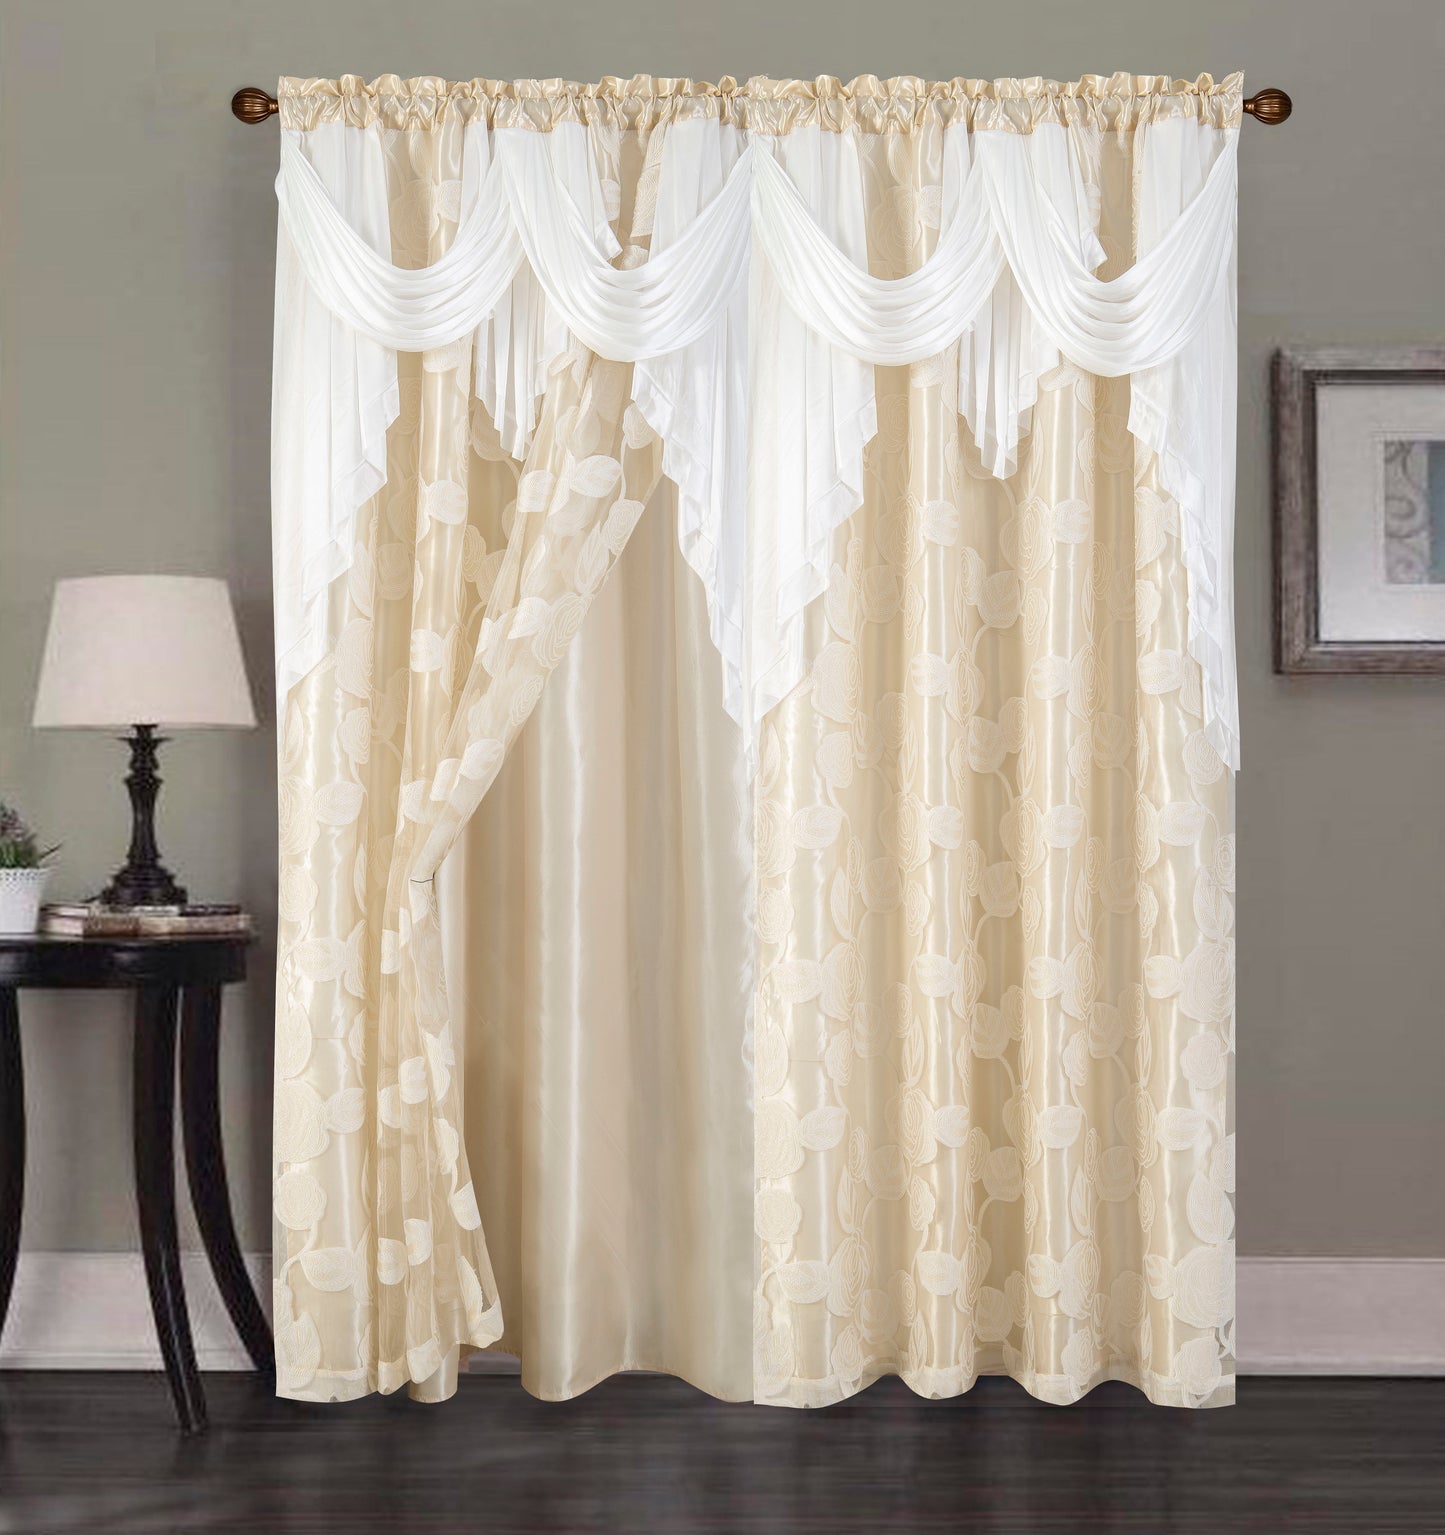 2PC CURTAIN SET W/ ATTACHED VALANCE & BACKING - Gill